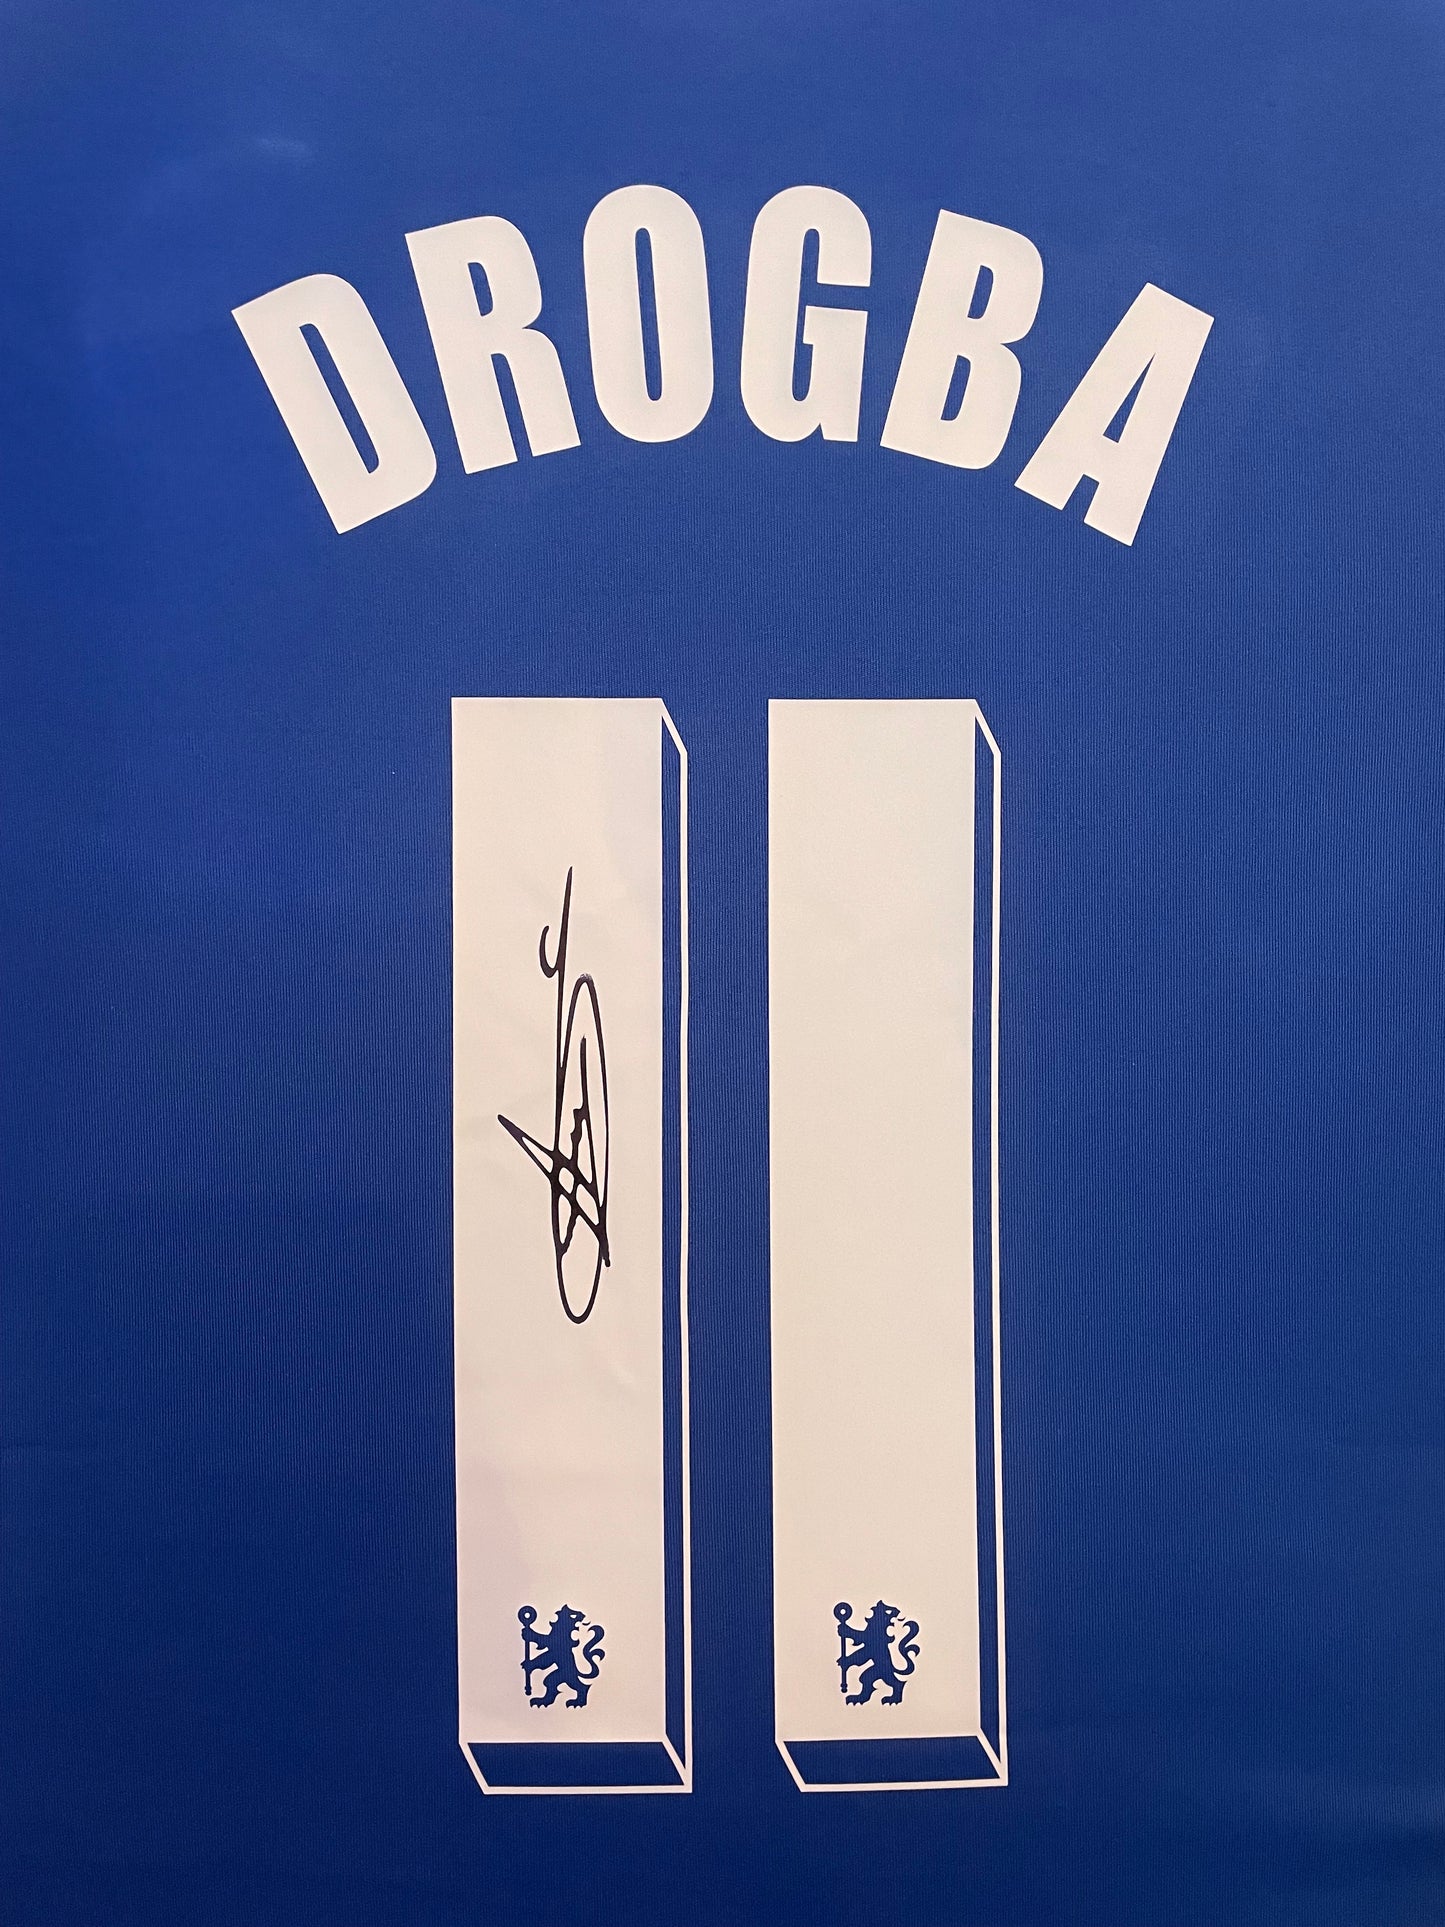 Didier Drogba Signed Chelsea 2011/12 Framed Home Shirt with COA